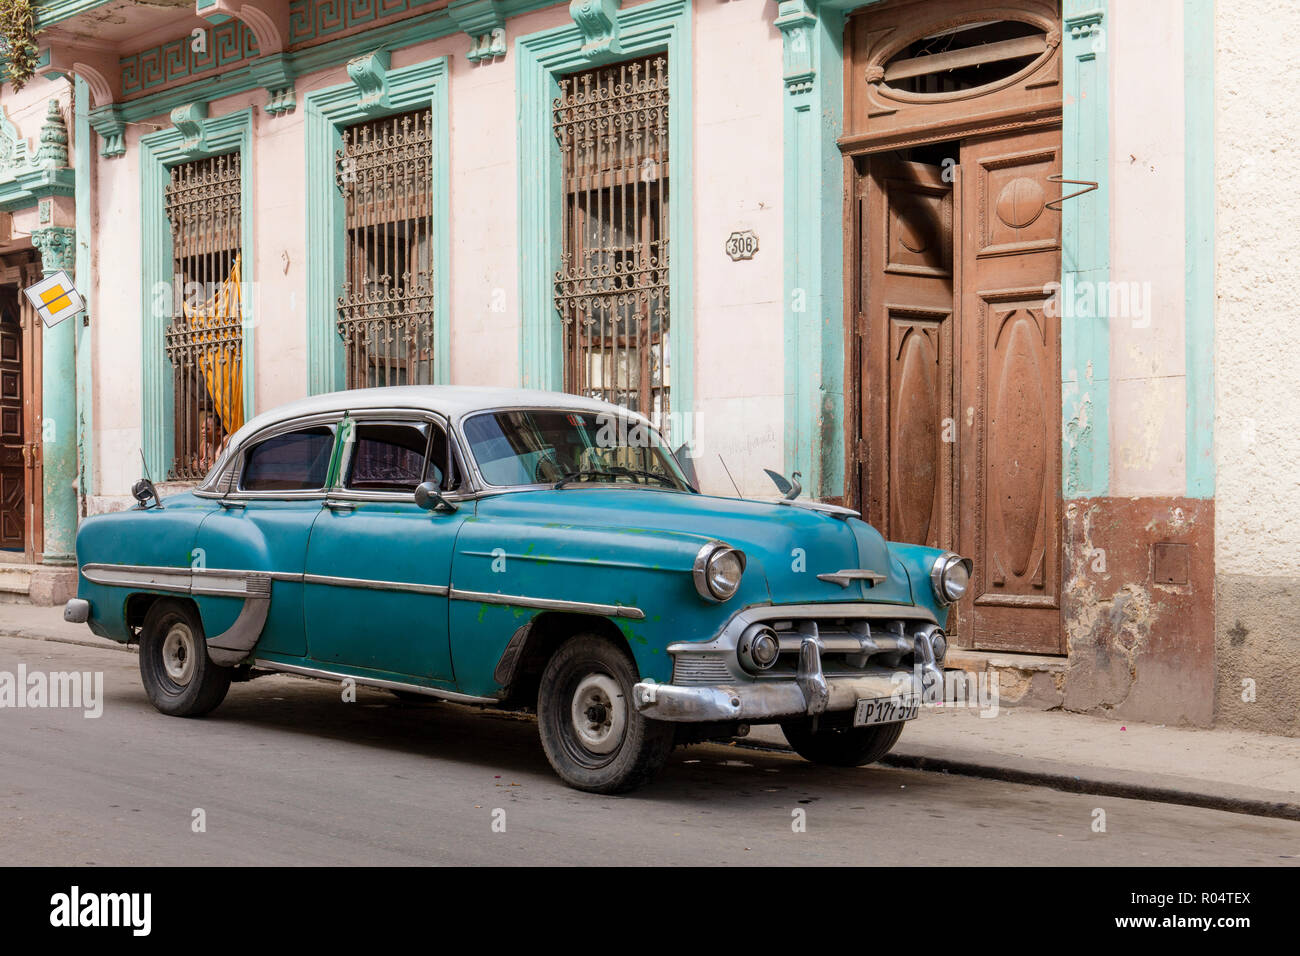 Old vintage American car parked in street, Havana, Cuba, West Indies, Caribbean, Central America Stock Photo